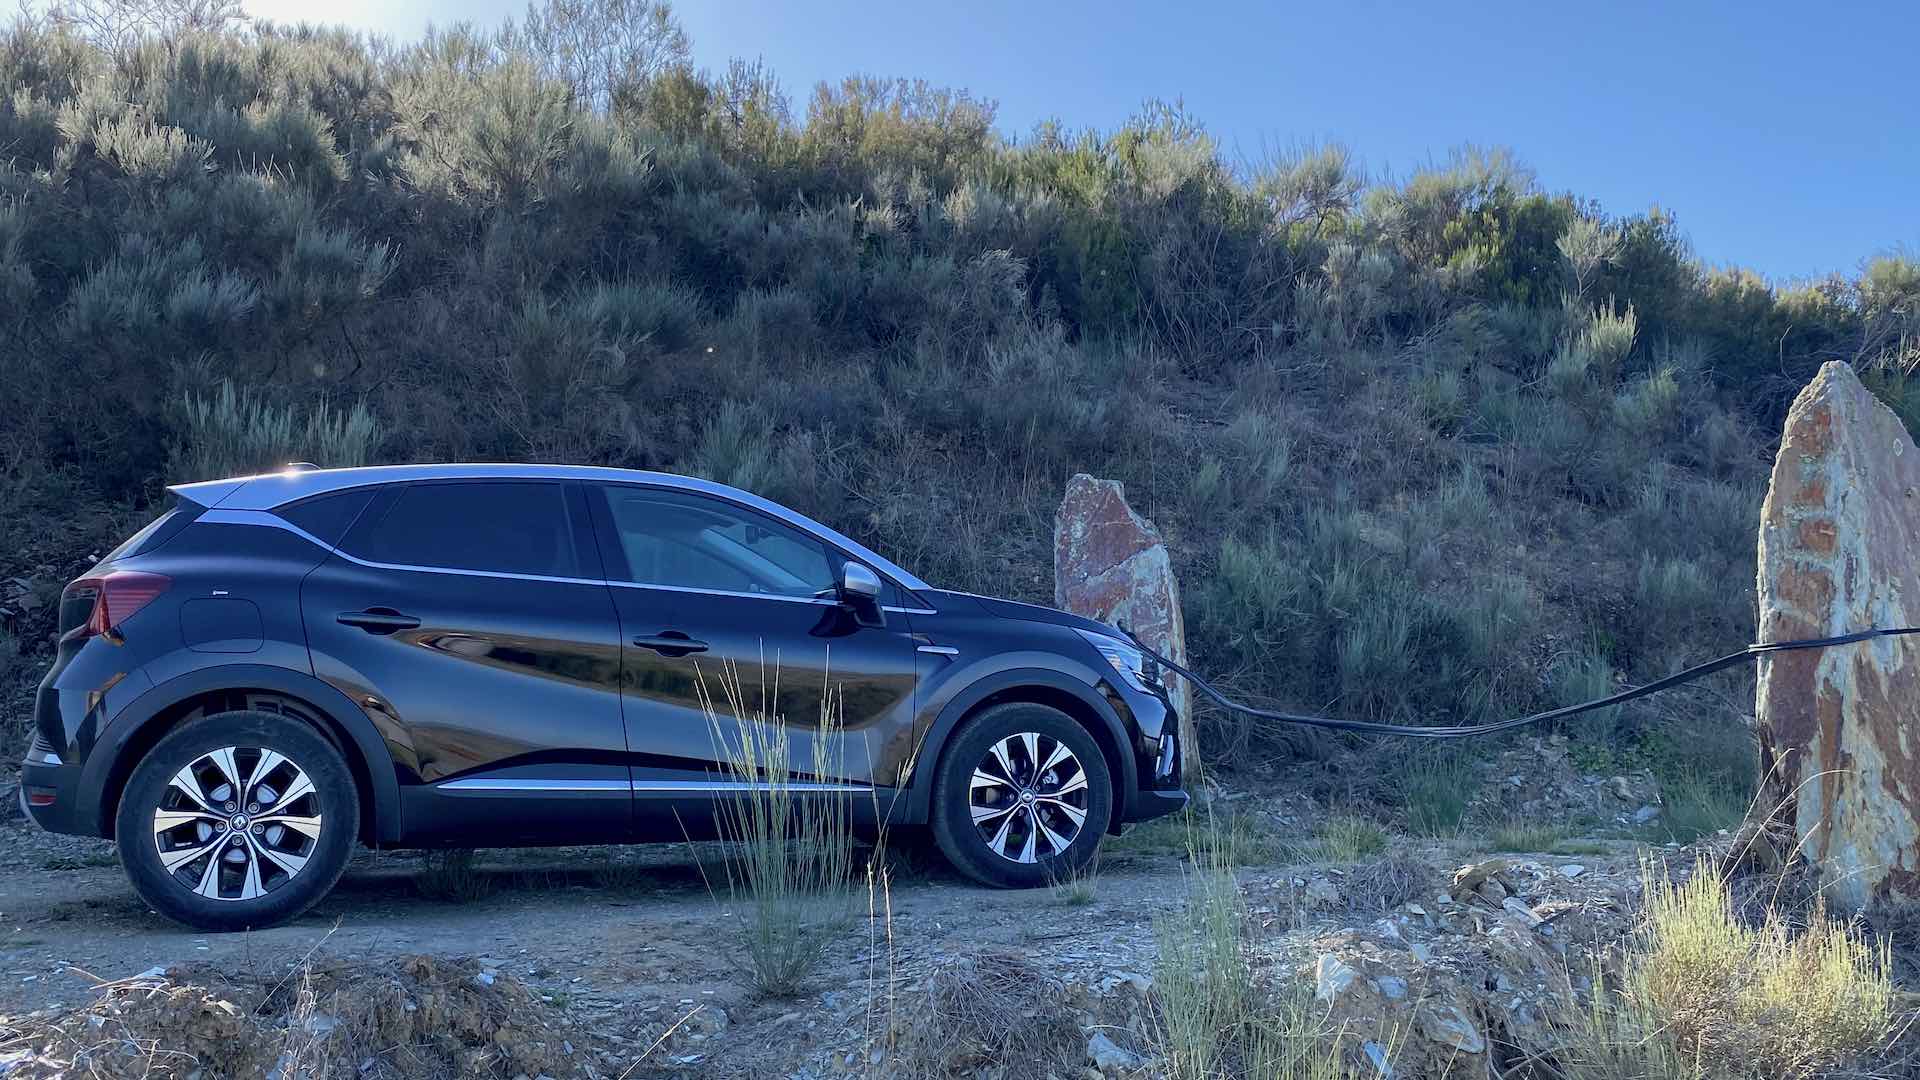 A little light off-roading in Portugal...